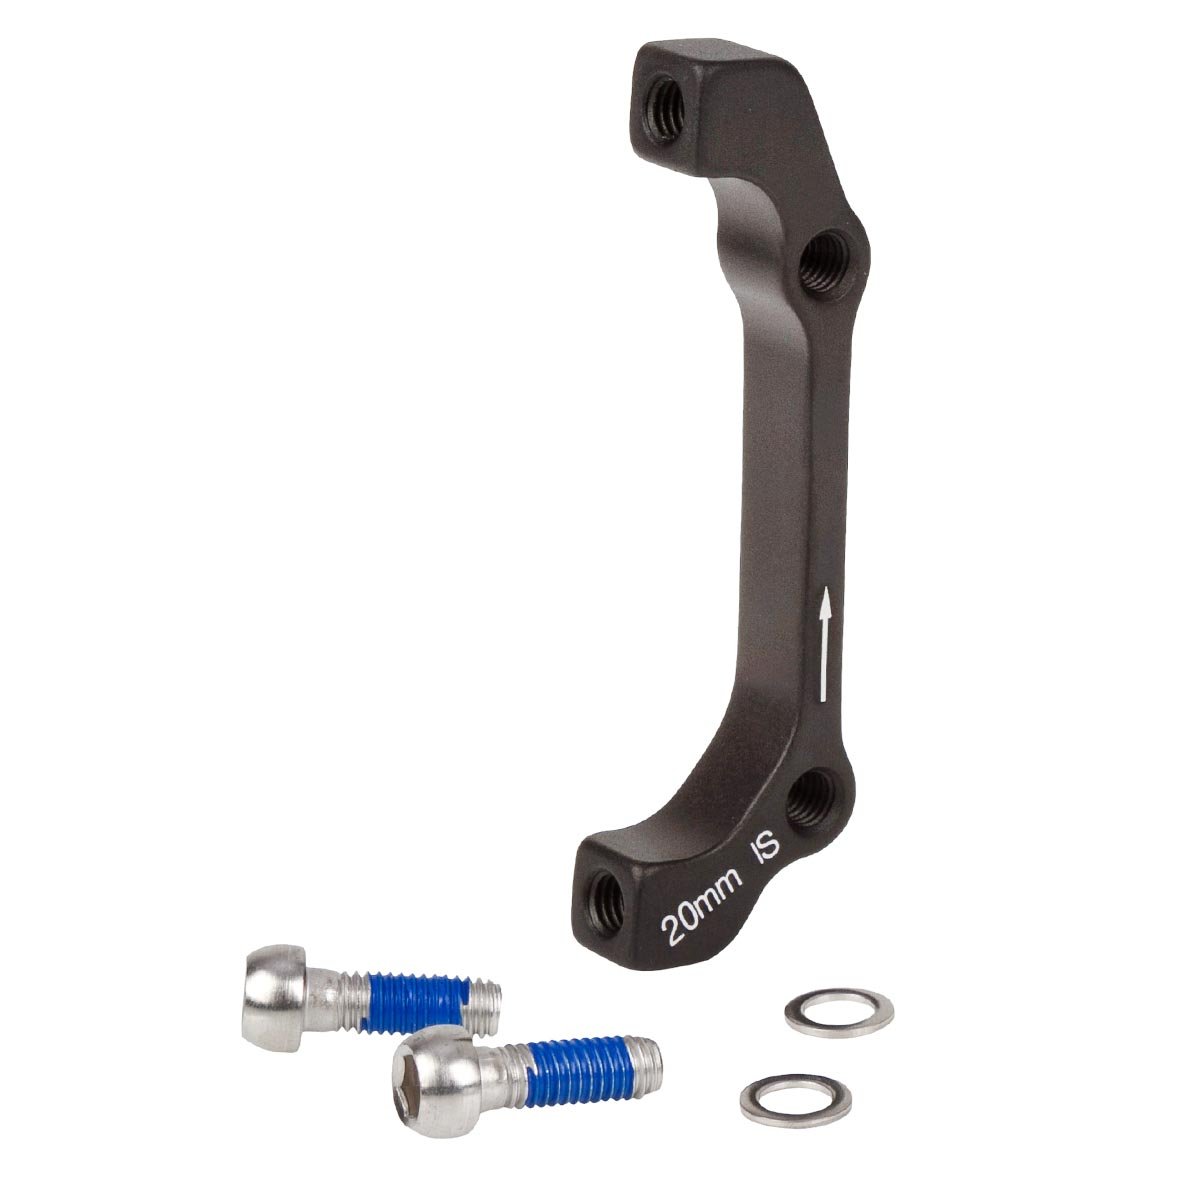 Avid Adapter 20IS Standard Front or Rear, for IS Brakes/IS-Forks, for 180/160 mm Brake Discs